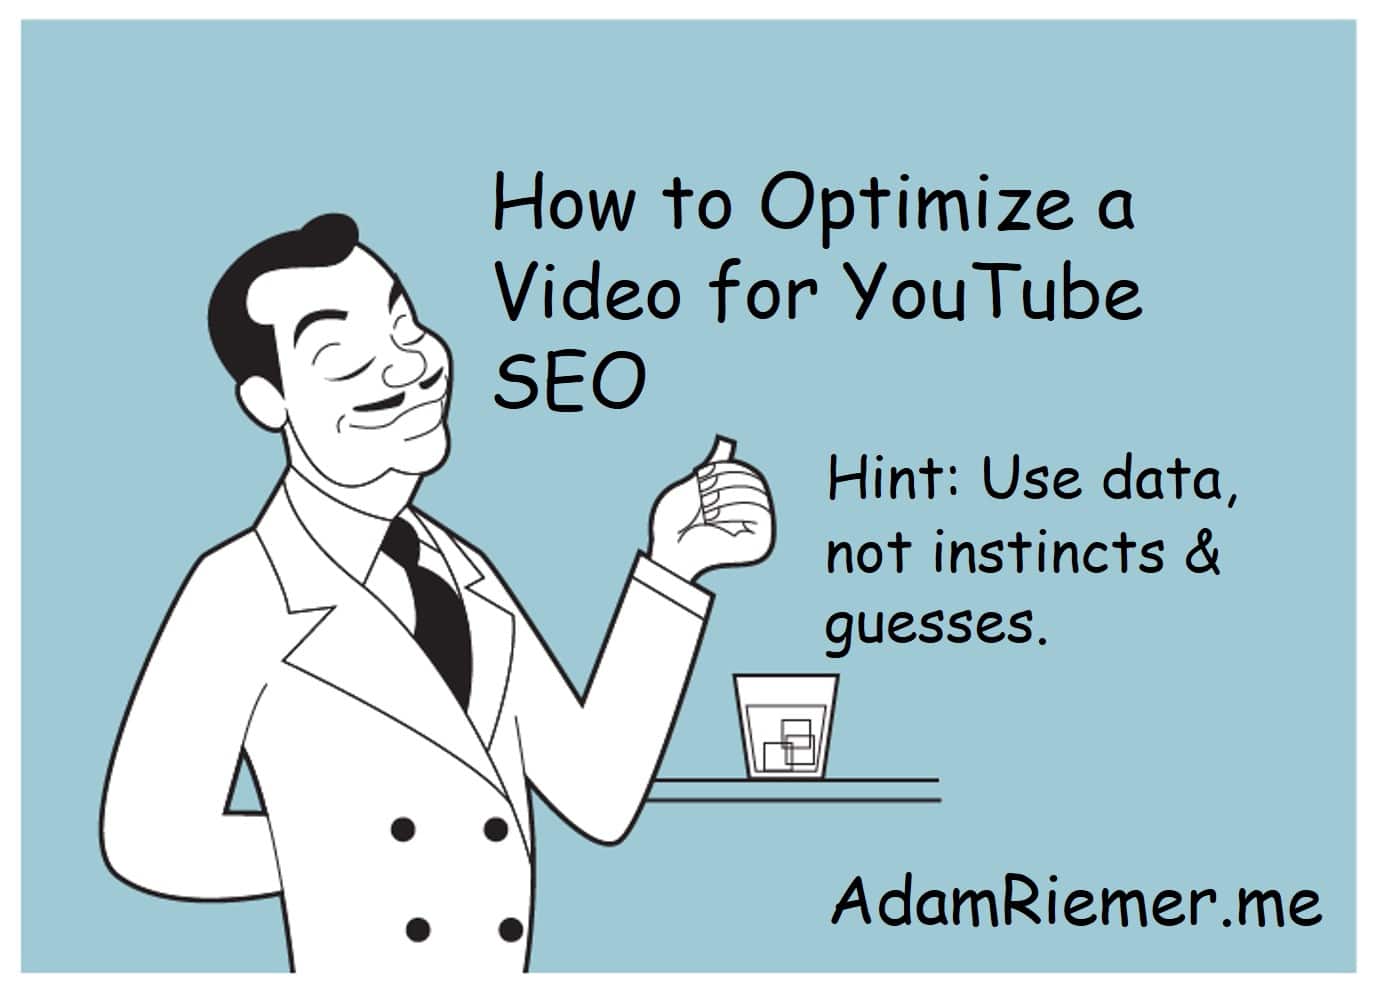 how to optimize a video for YouTube seo